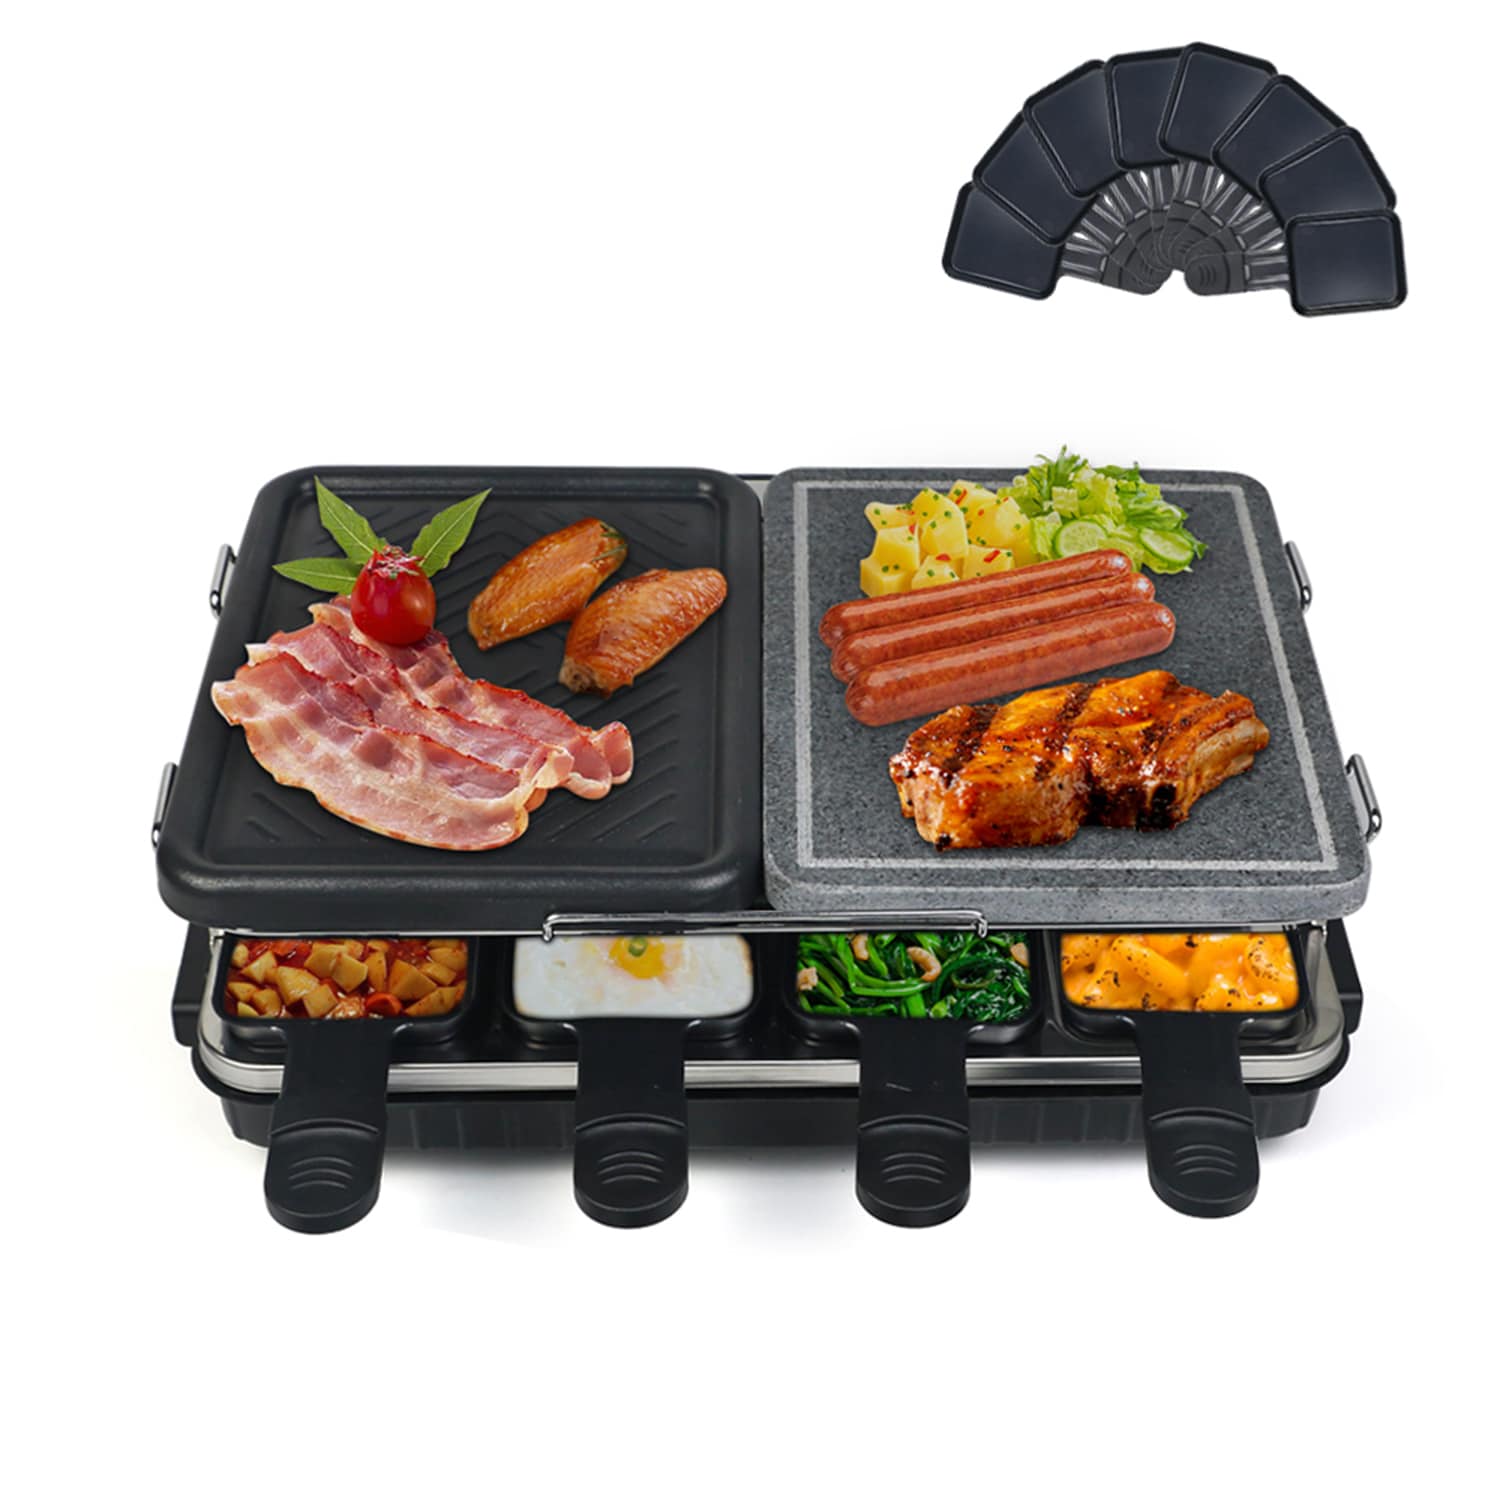 Bybafun 16.1-IN Table Top Multi-Purpose - Grill Korean the in Non-Stick Electric 1300W with Grill BBQ Grills Grill Barbecue at Electric Cooking and Stone department Plate for